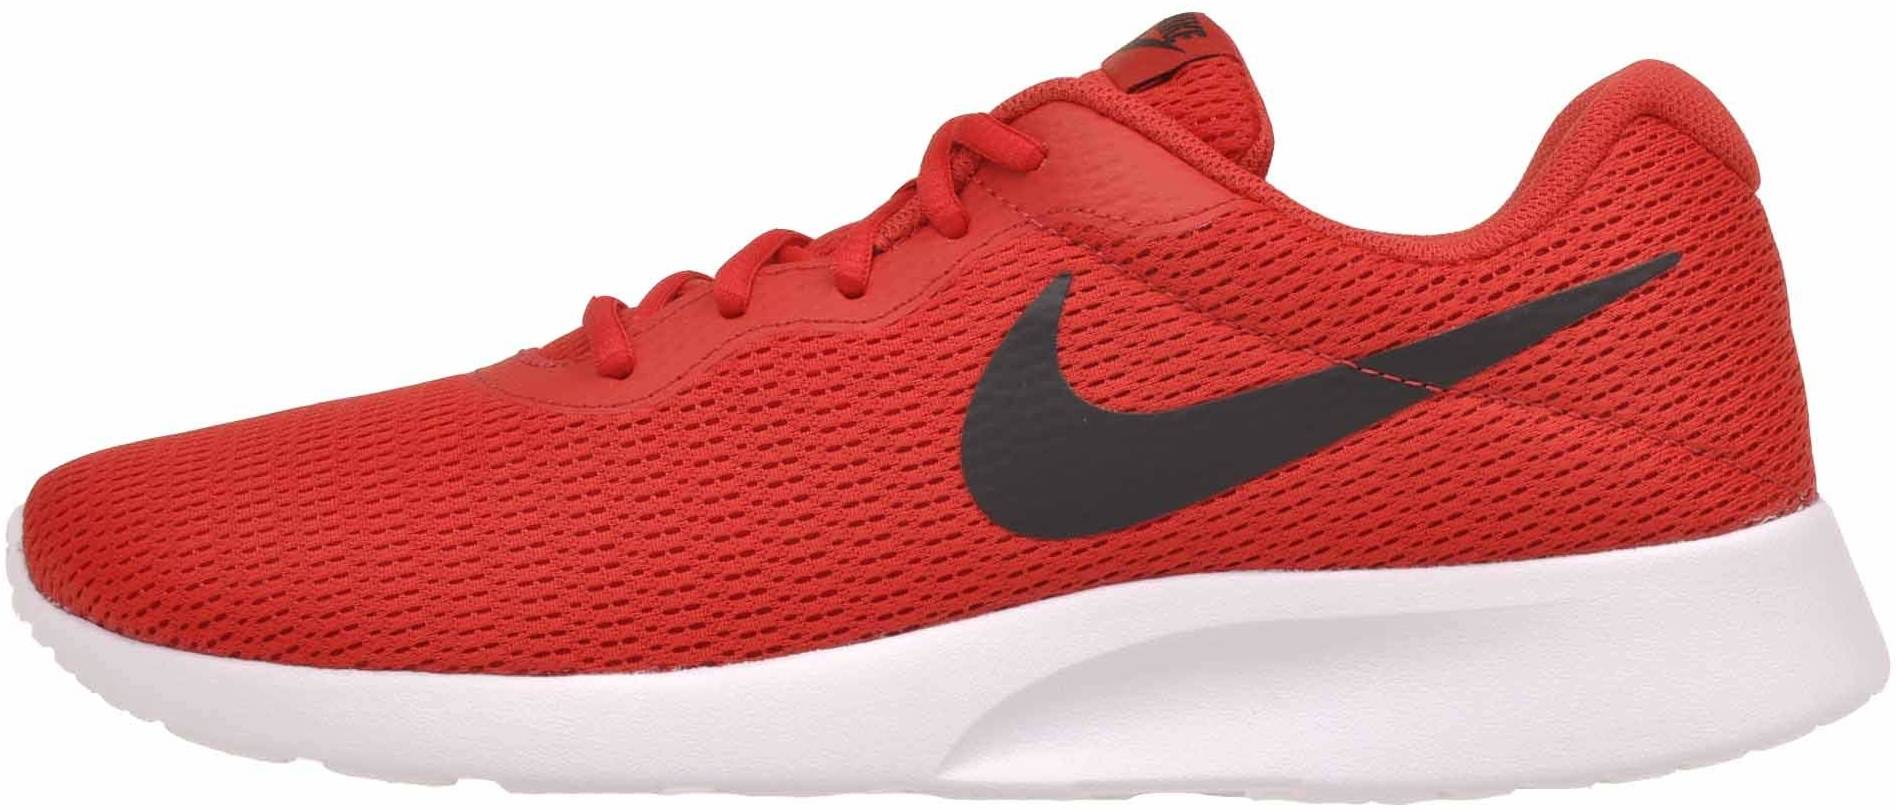 all red nike running shoes 